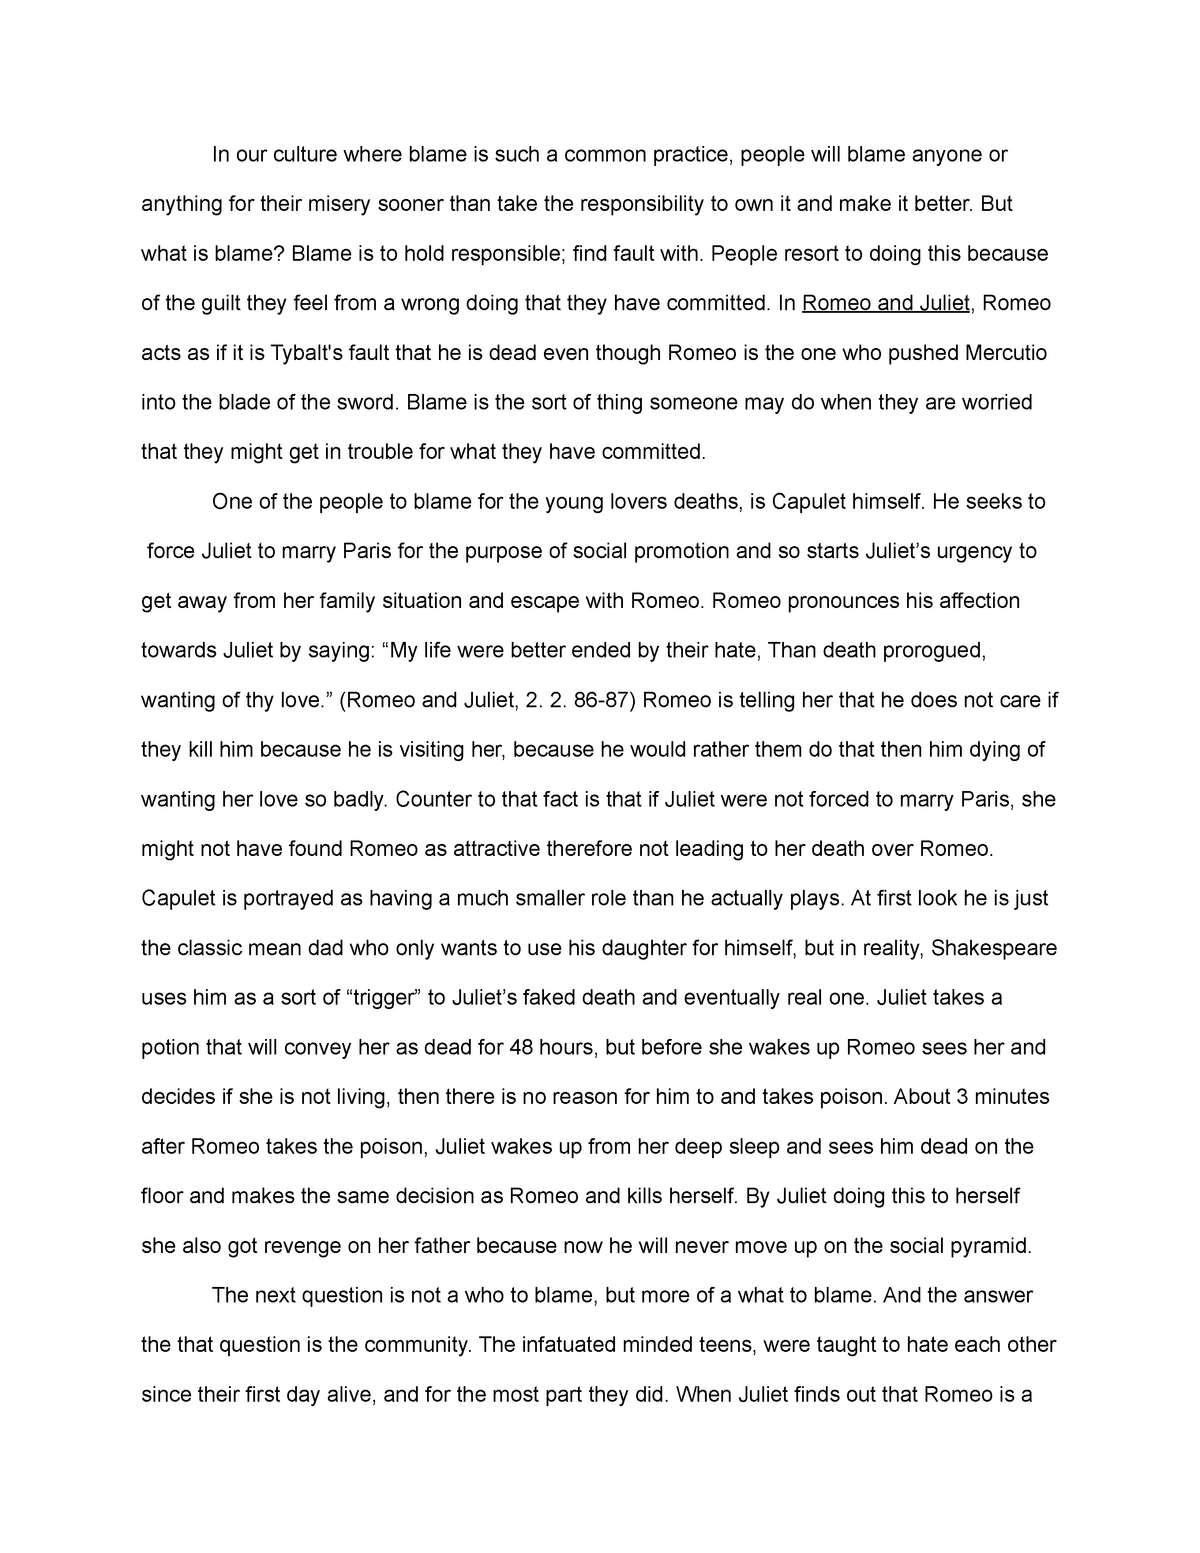 romeo and juliet expository essay